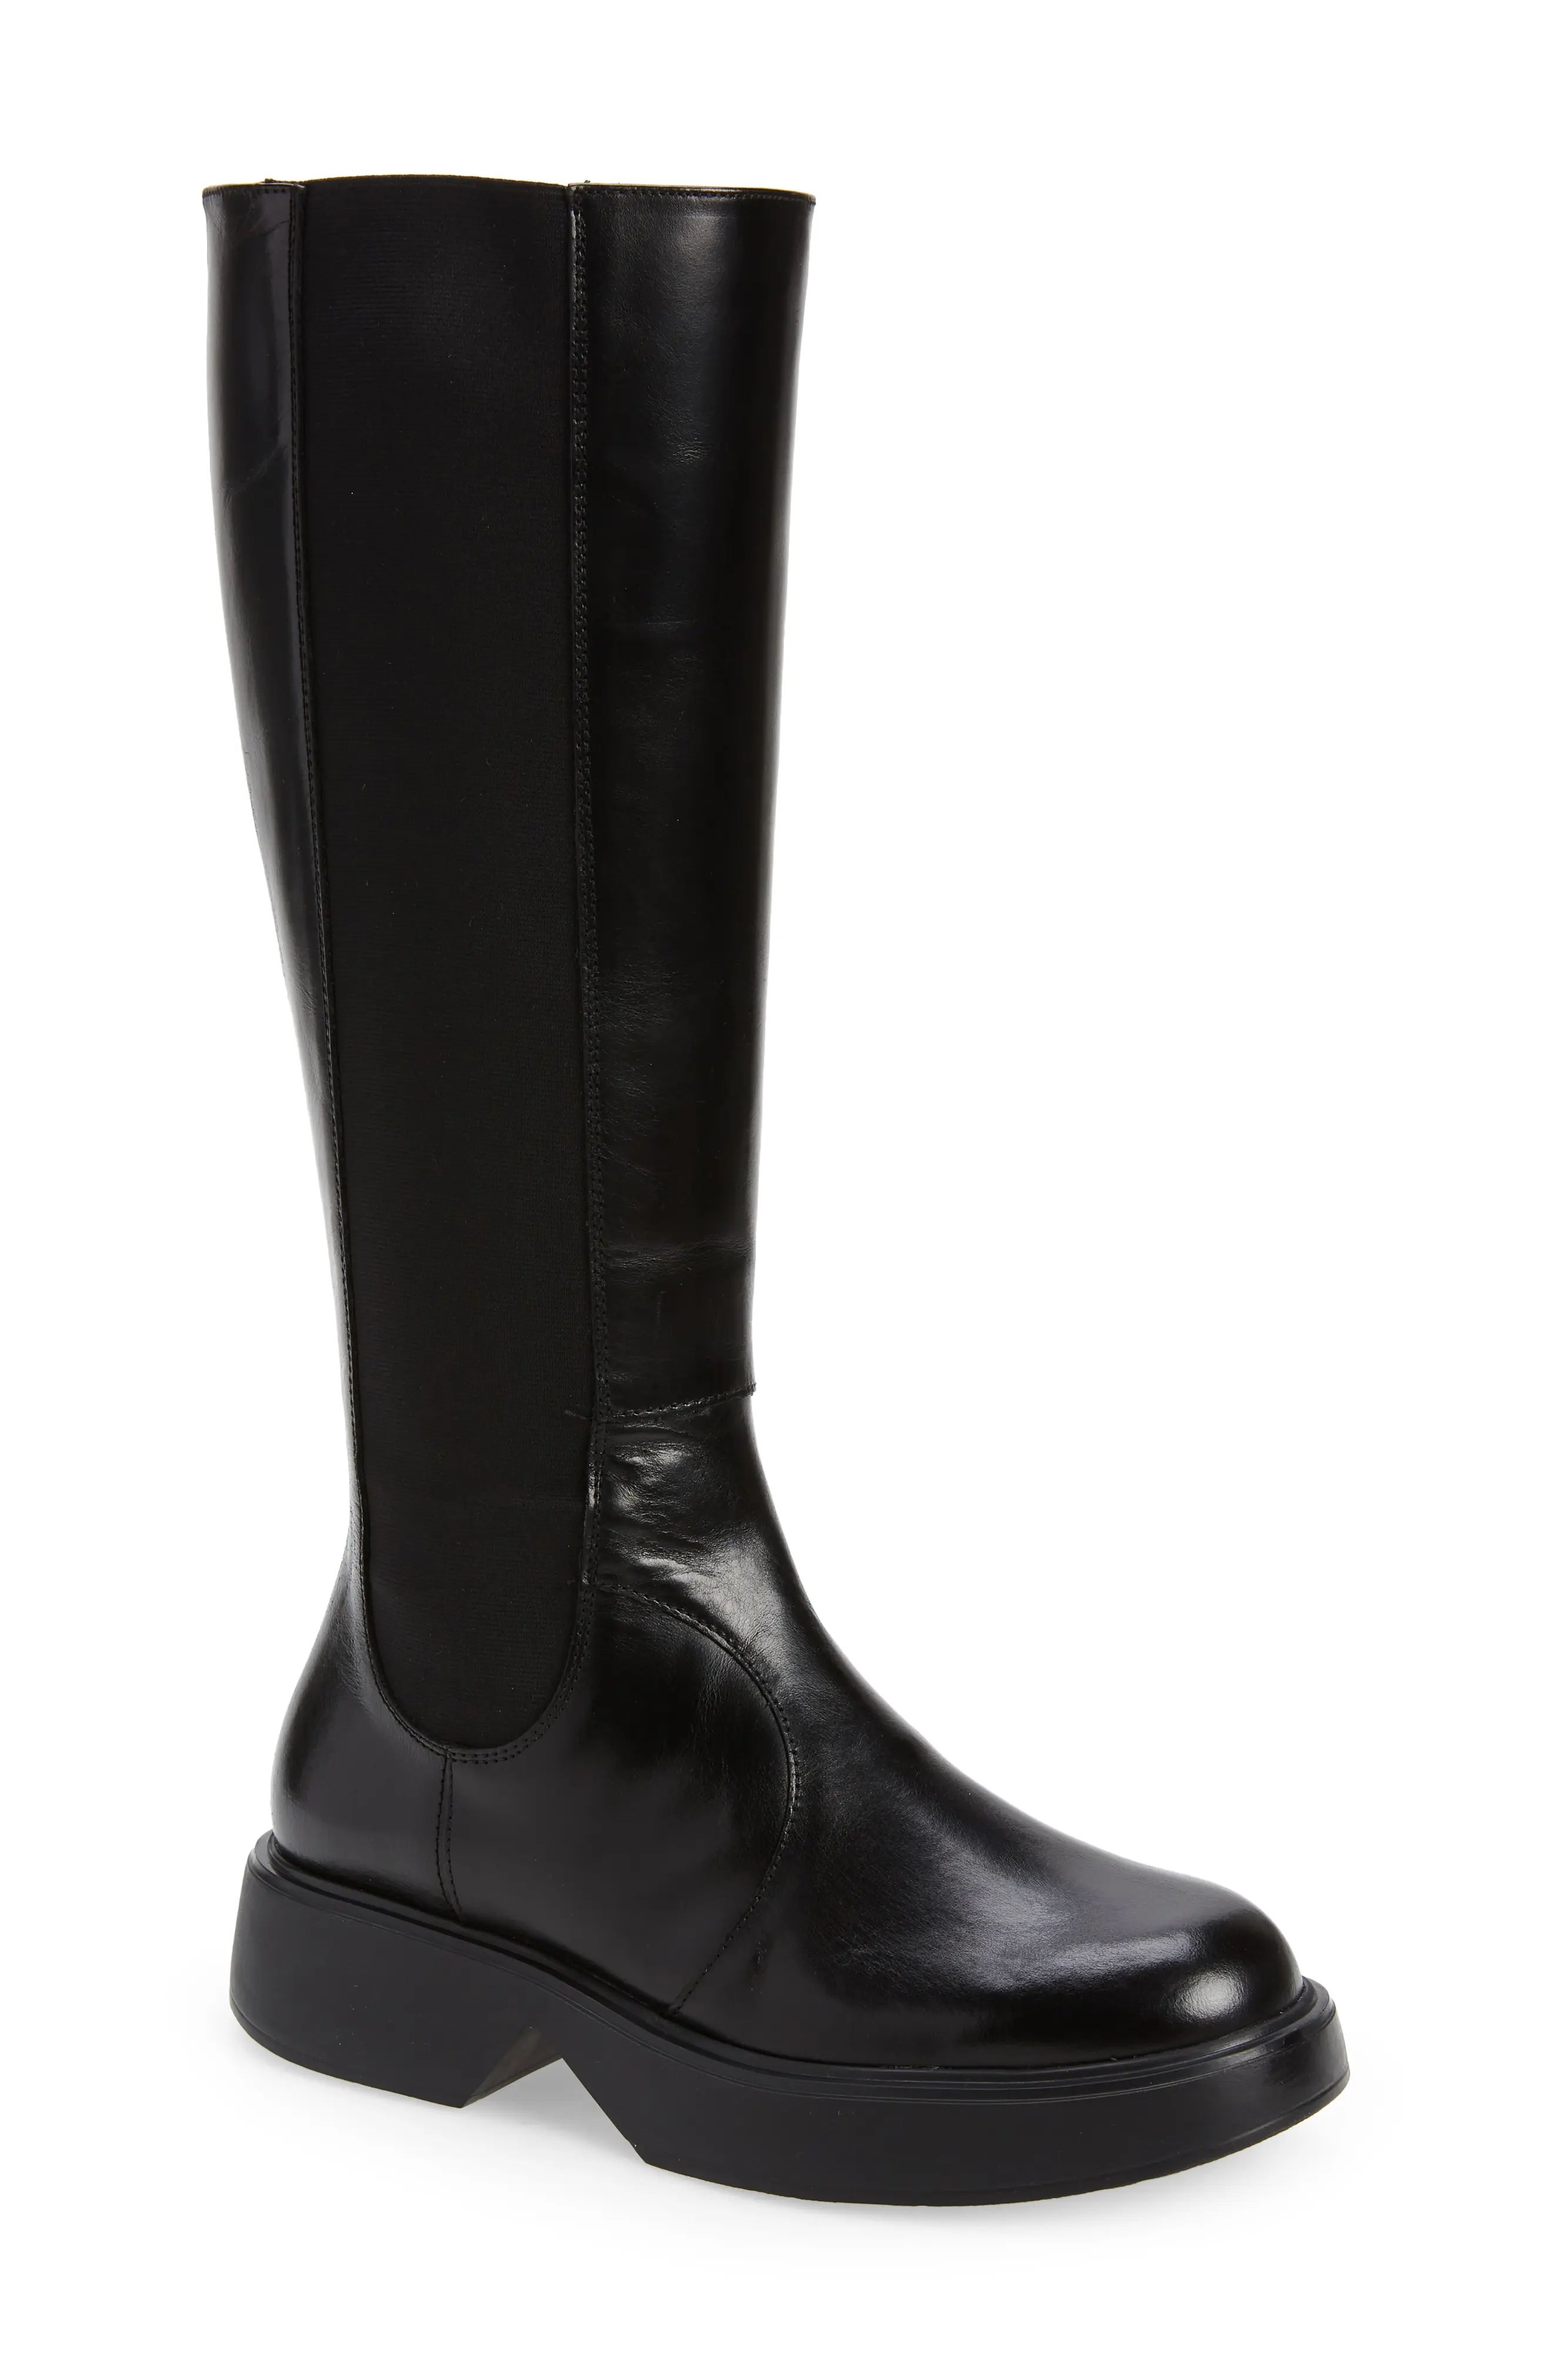 Wonders Knee High Leather Boot, Size 9.5-10Us in Black at Nordstrom | Nordstrom